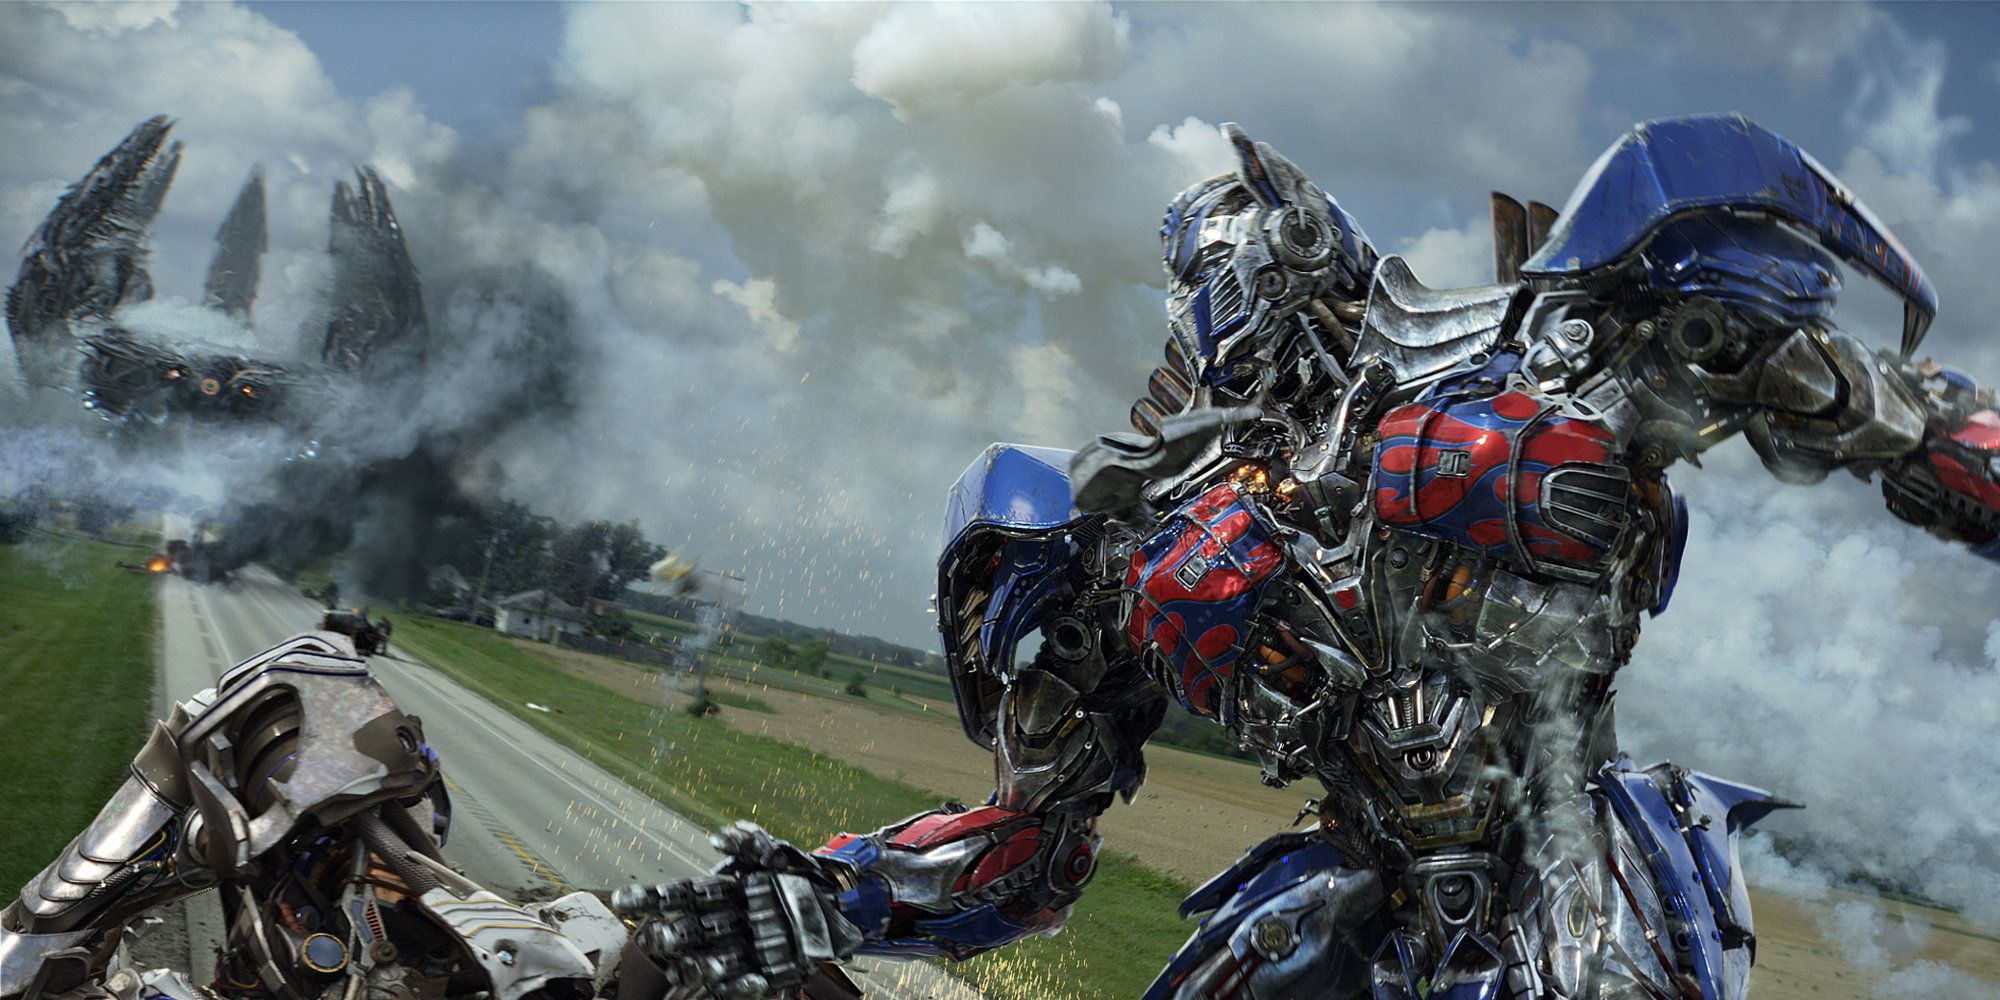 Optimus Prime fighting with another robot in Transformers_ Age of Extinction